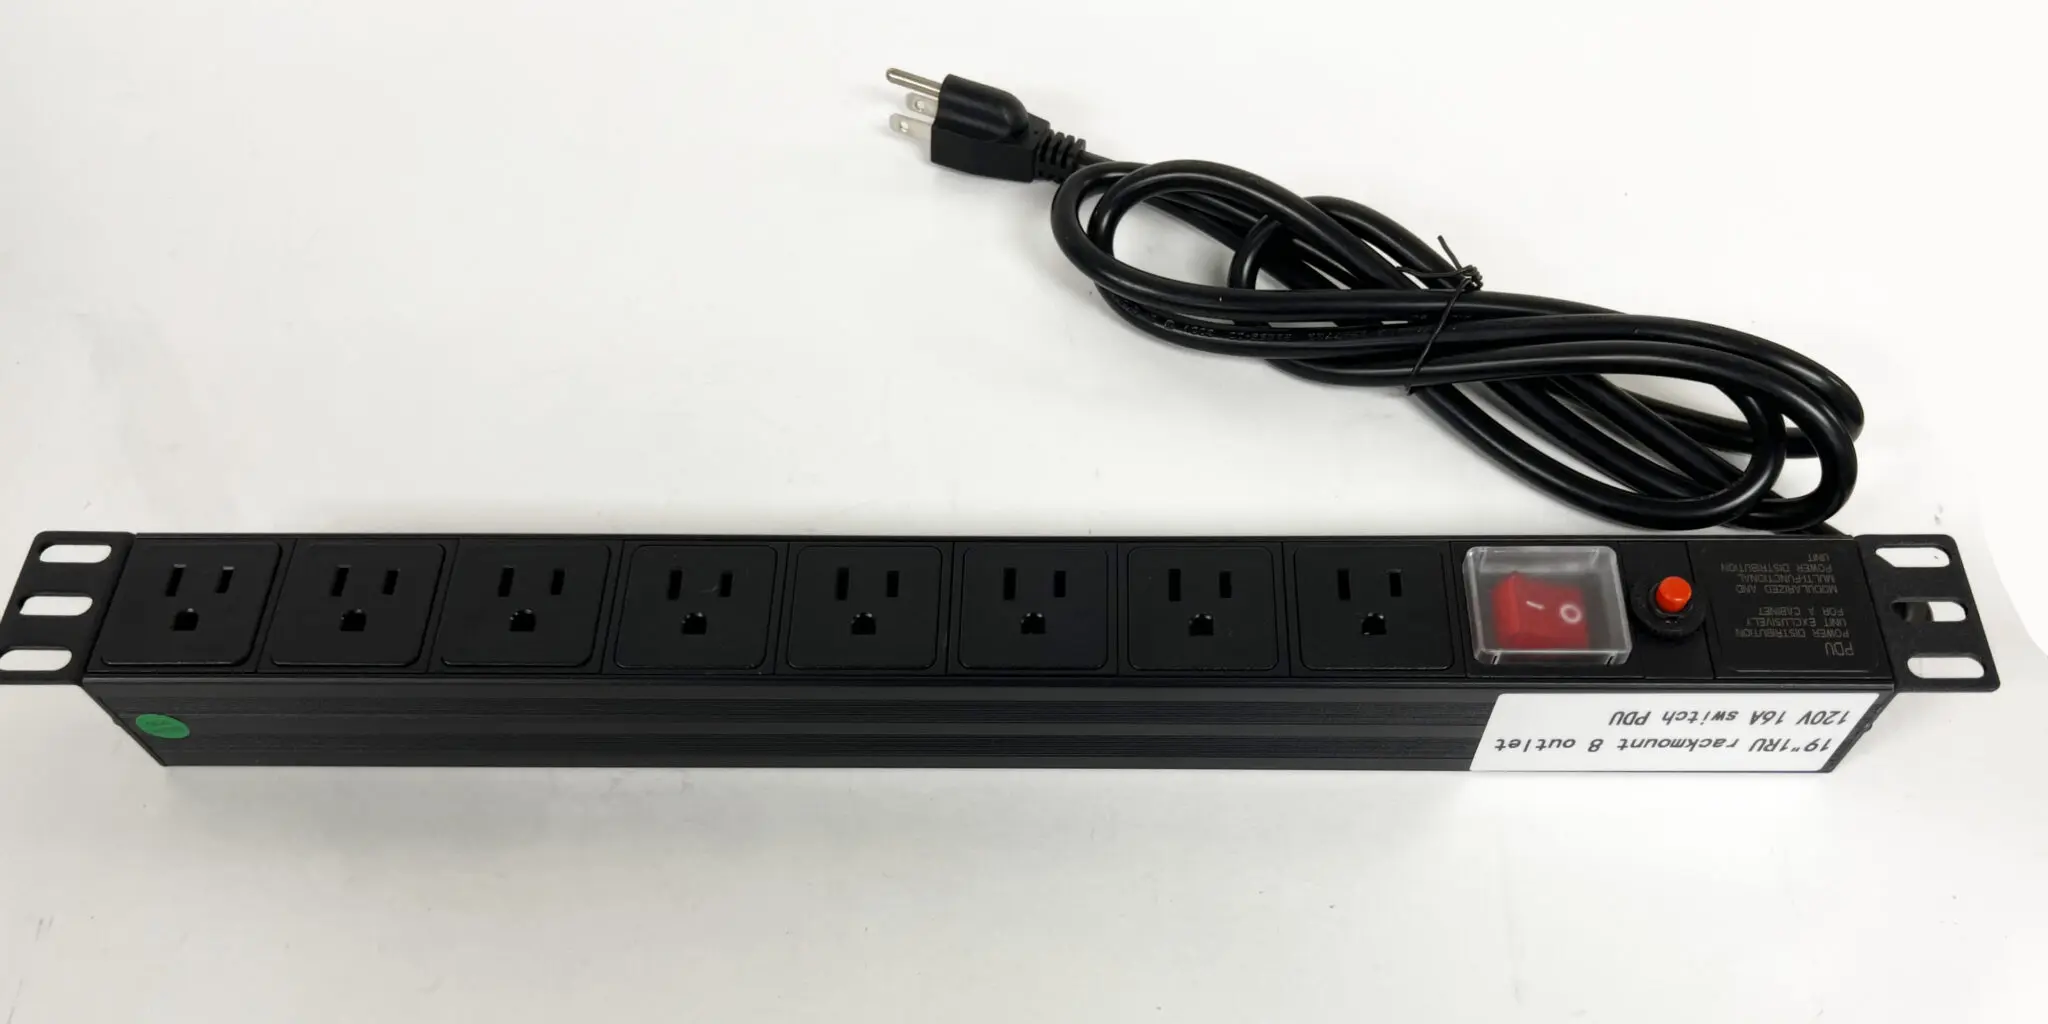 A black power strip with six outlets and an extension cord.